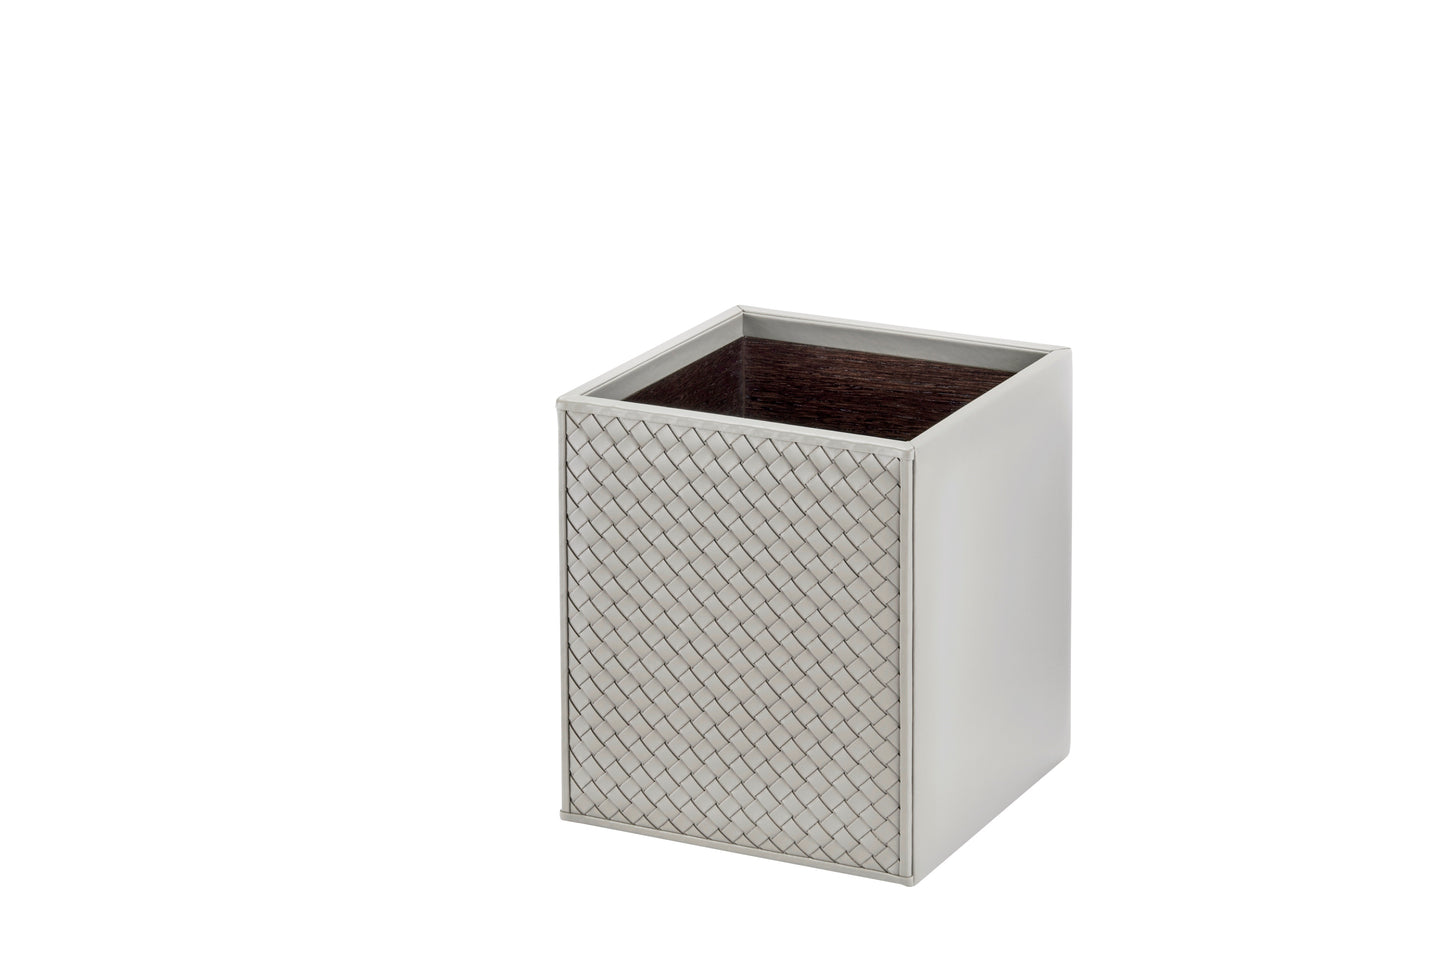 Riviere Ivo Handwoven Leather-Covered Wastepaper Bin | Exquisite Craftsmanship and Design | Elevate Your Workspace with Luxury and Style | Available at 2Jour Concierge, #1 luxury high-end gift & lifestyle shop